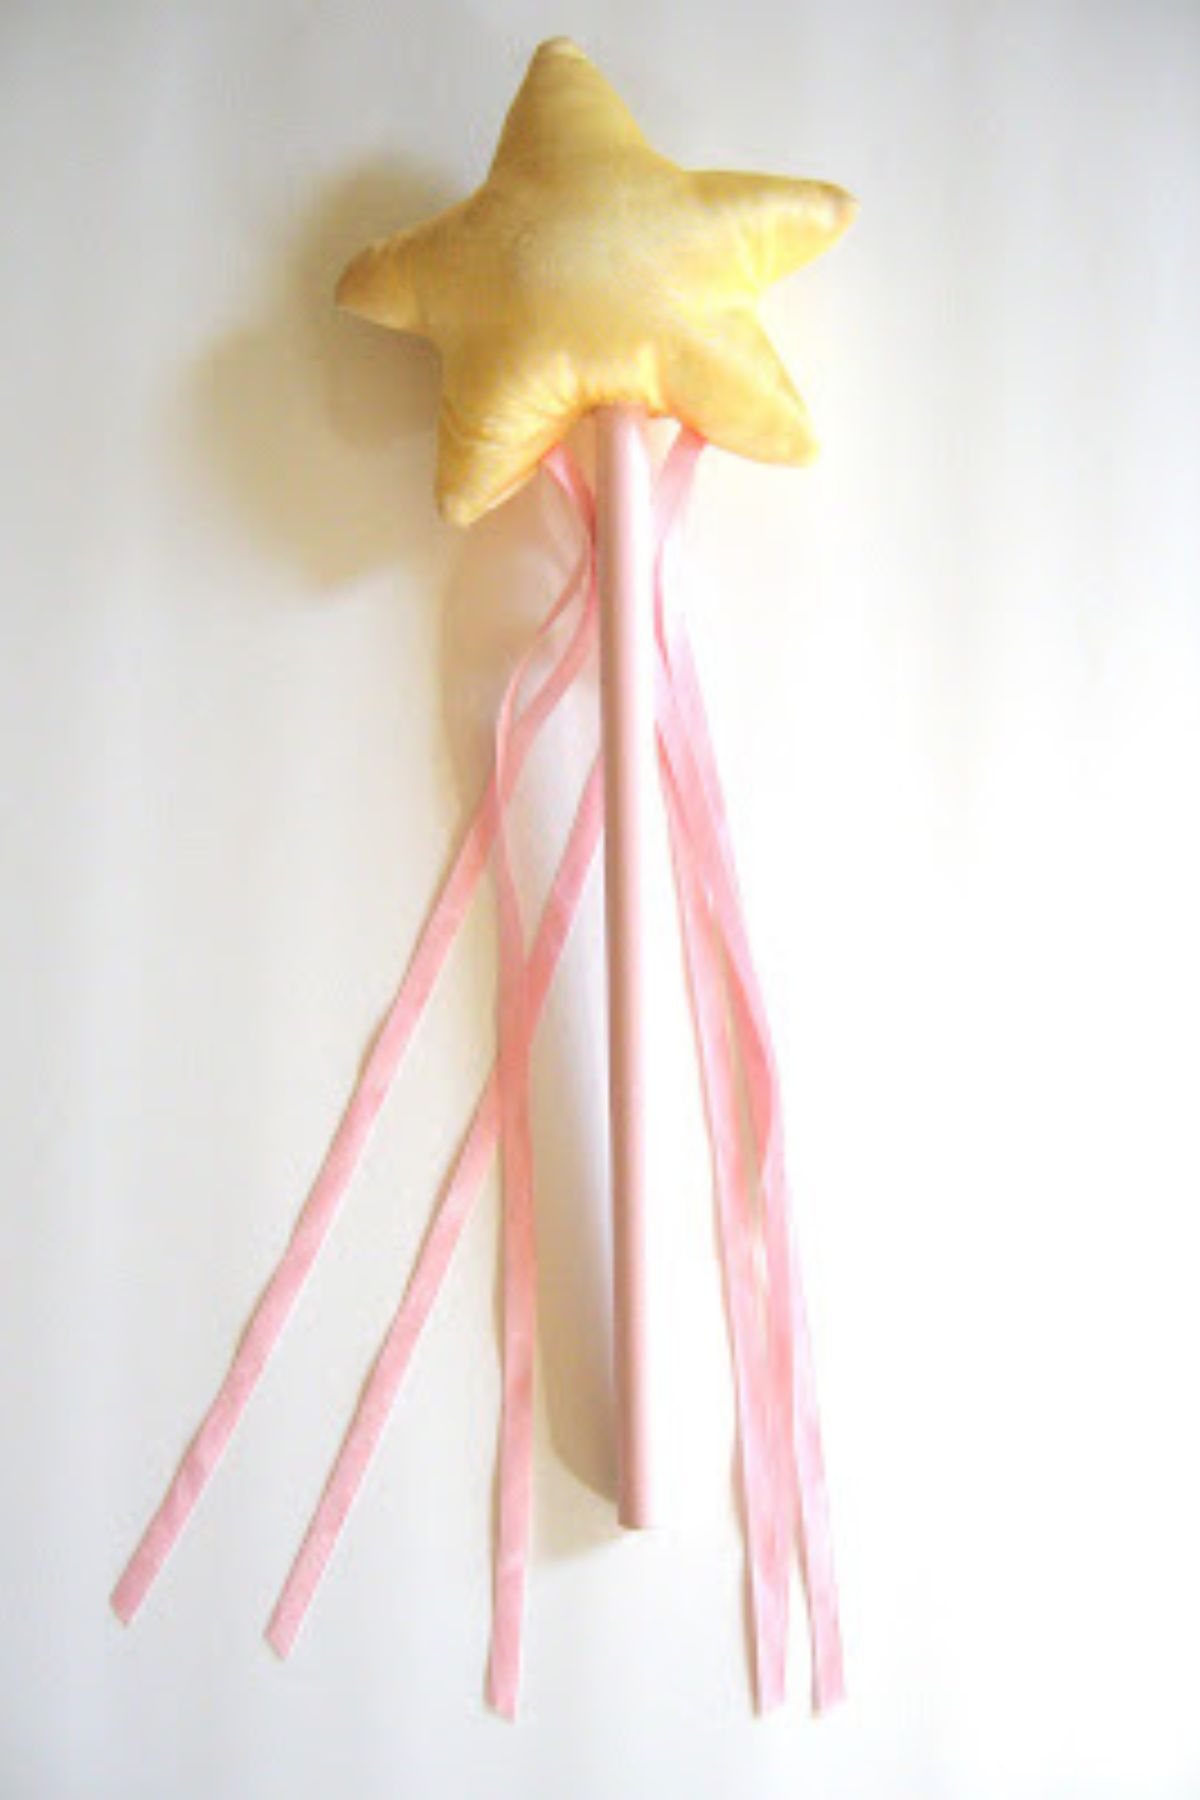 Pink handled DIY fairy wand with yellow star on top.